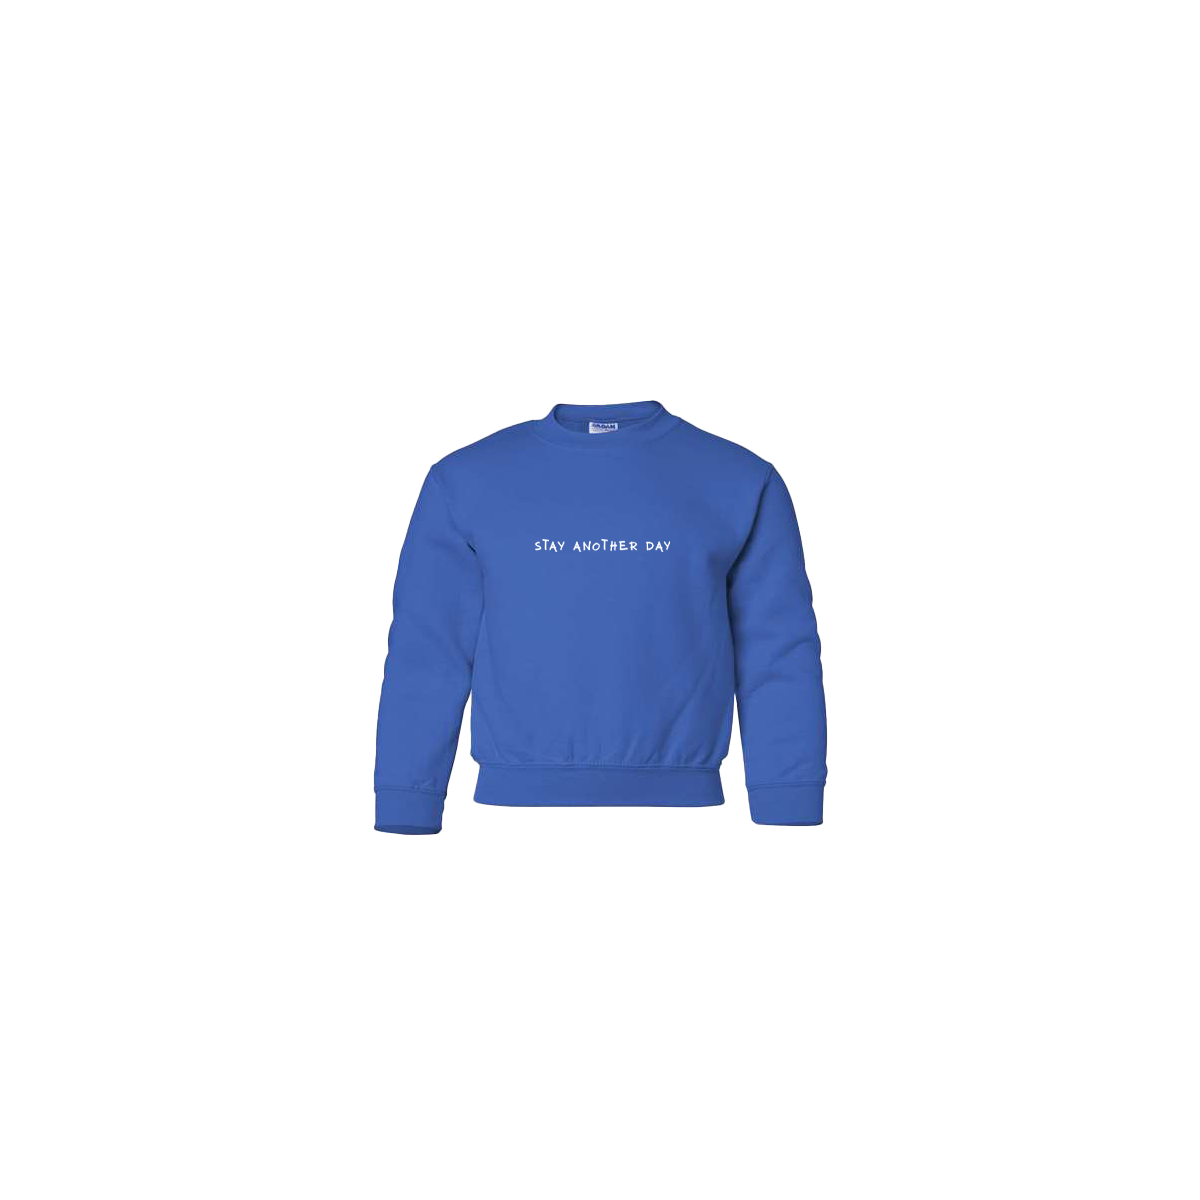 Stay Another Day Text Embroidered Royal Blue Youth Crewneck